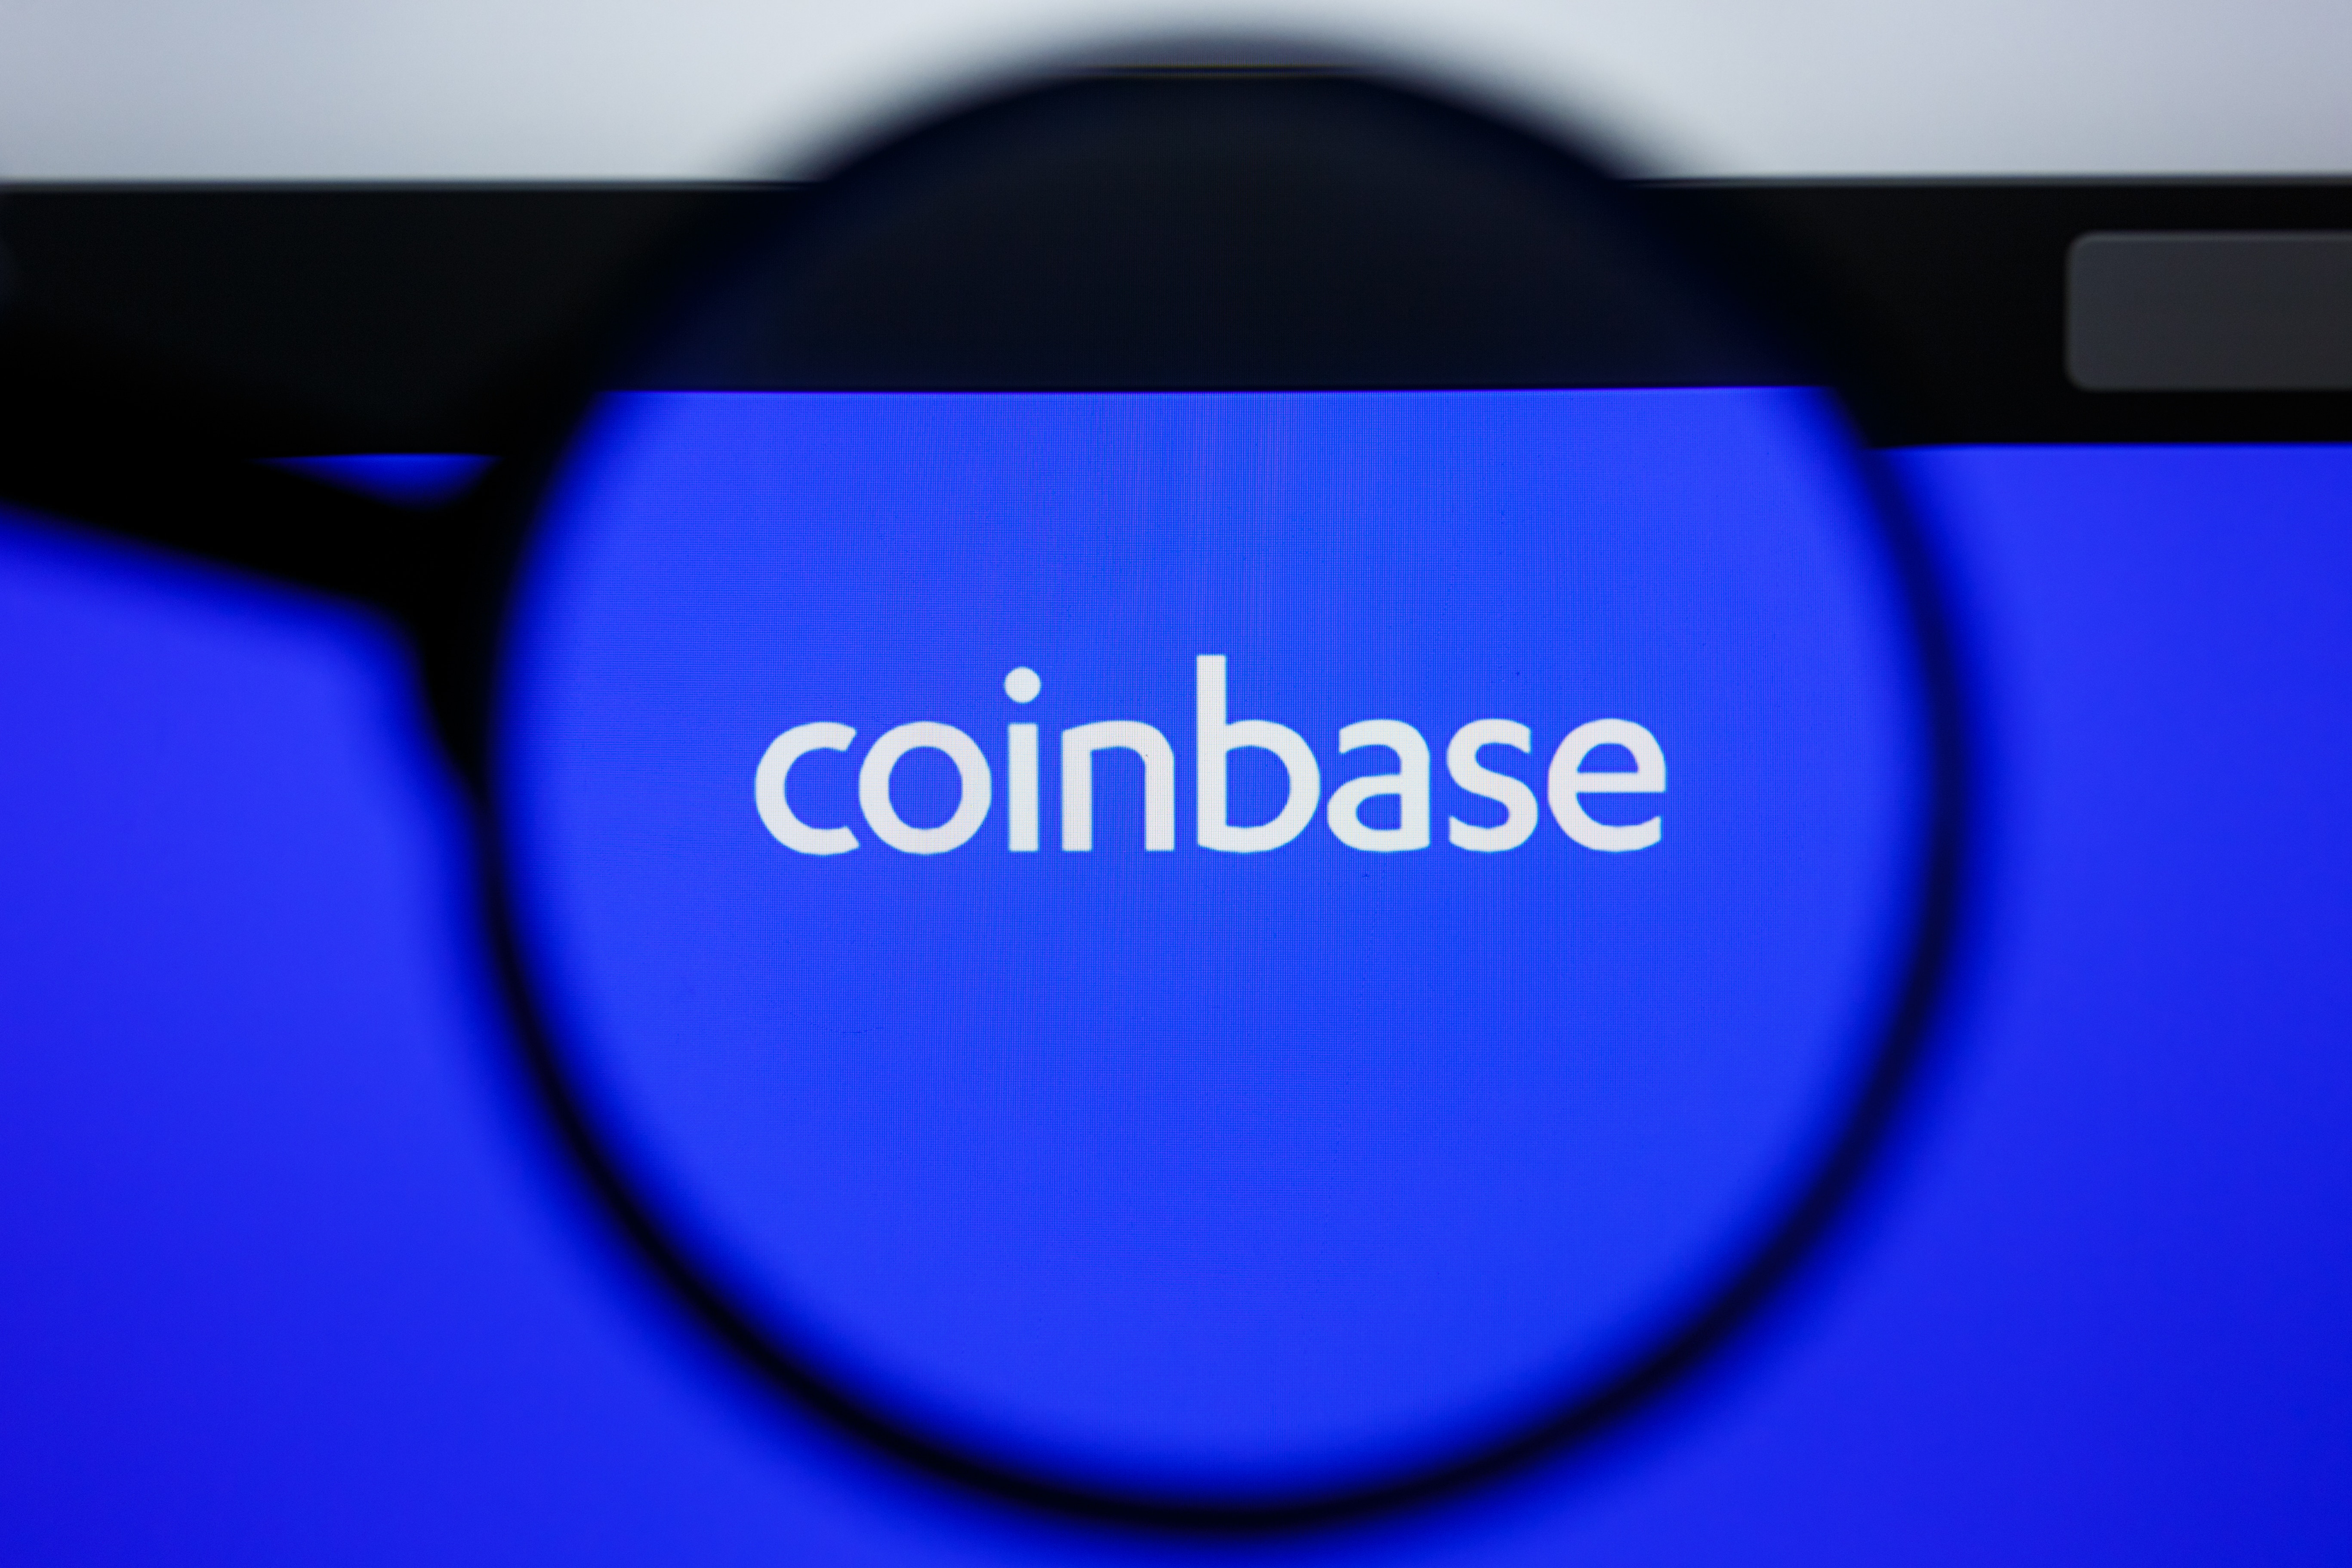 Coinbase Price Target Cut By Mizhuo: Analysts See 'Problematic Trend'